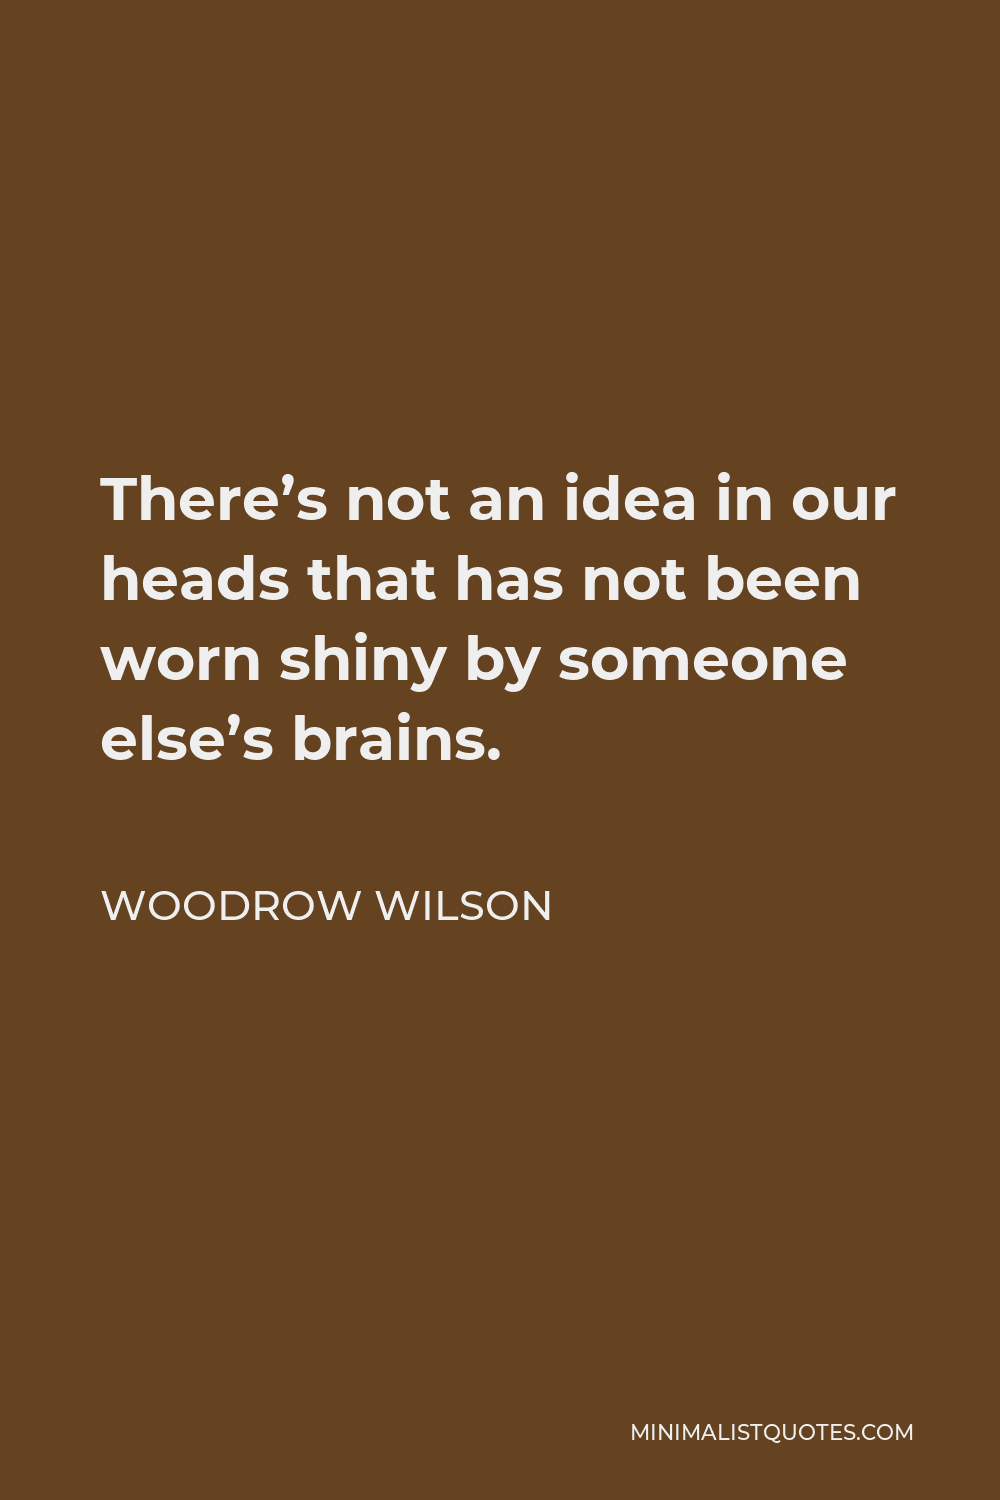 Woodrow Wilson Quote - There’s not an idea in our heads that has not been worn shiny by someone else’s brains.